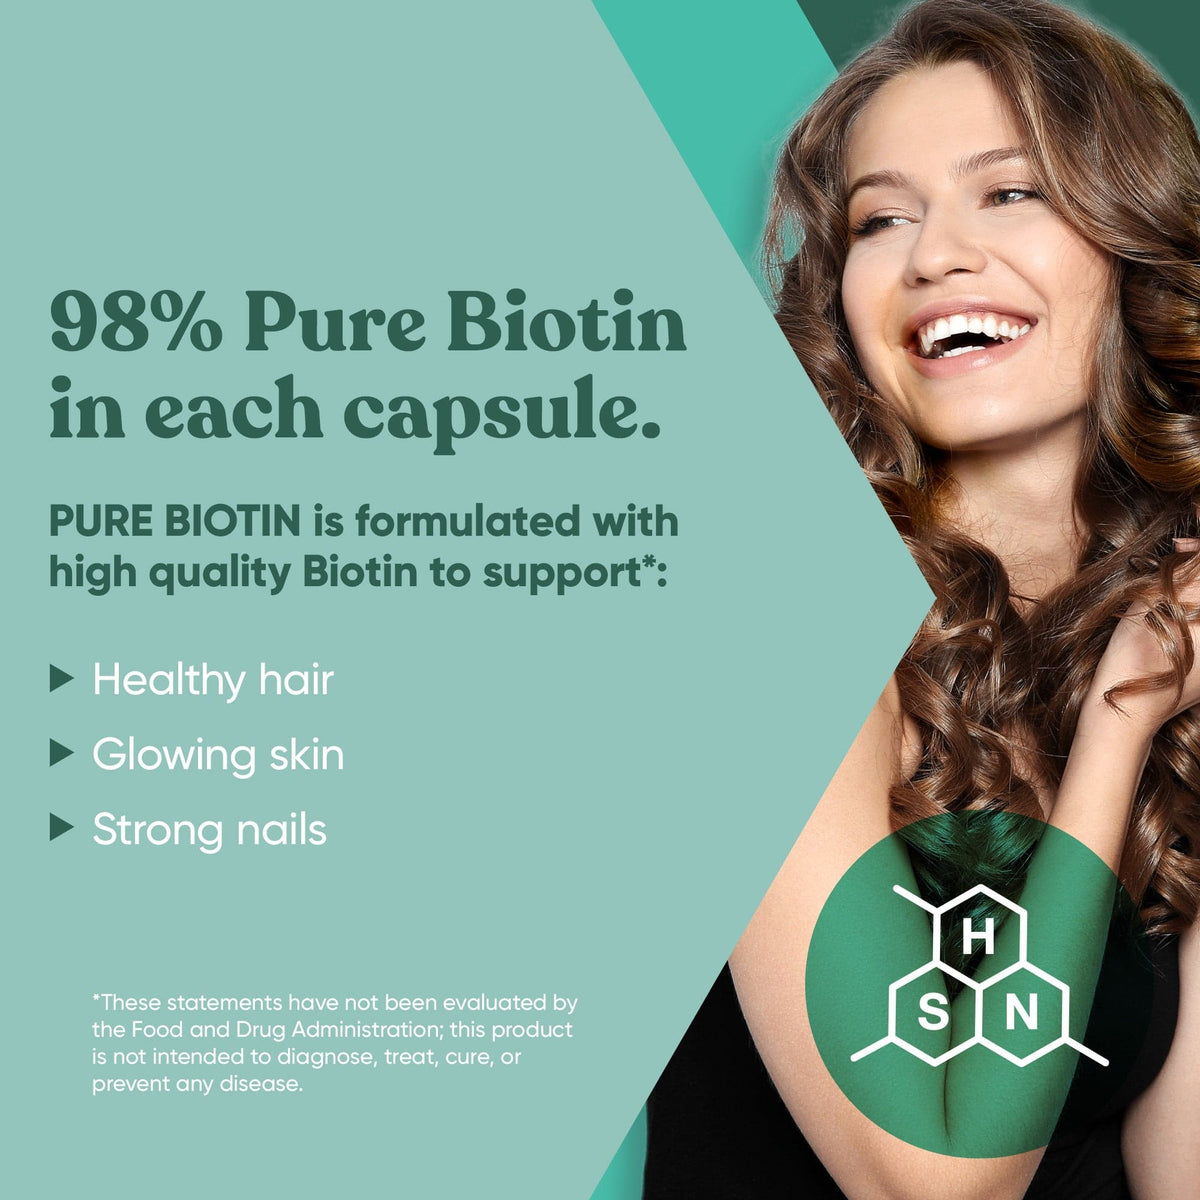 Eu Natural PURE BIOTIN &lt;br&gt;Hair, Skin, and Nail Booster &lt;br&gt;(6 Pack)